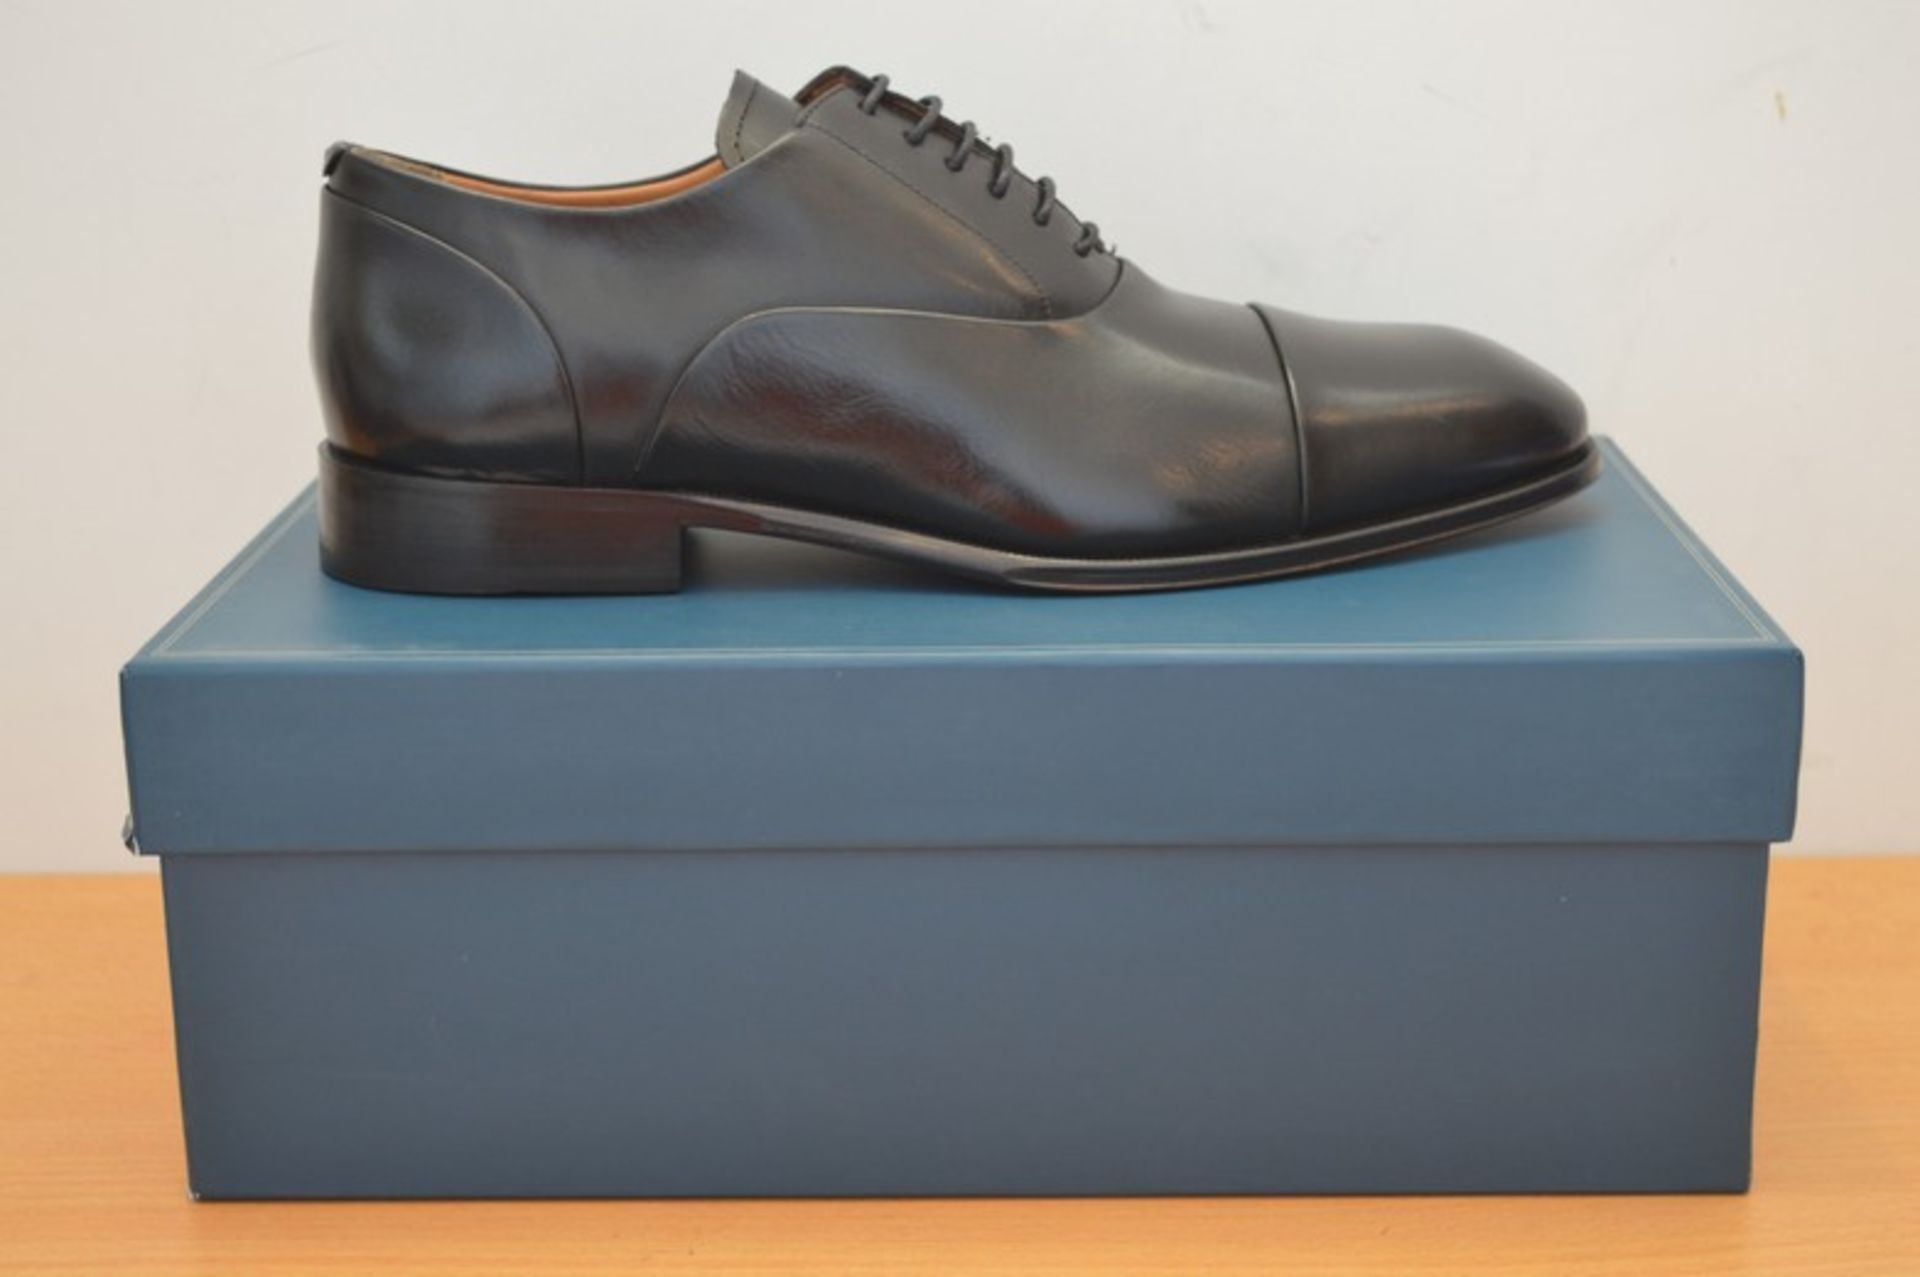 BOXED BRAND NEW JOHN LEWIS GOODWIN BLACK LEATHER GENTS SHOES IN SIZE 8 RRP £80